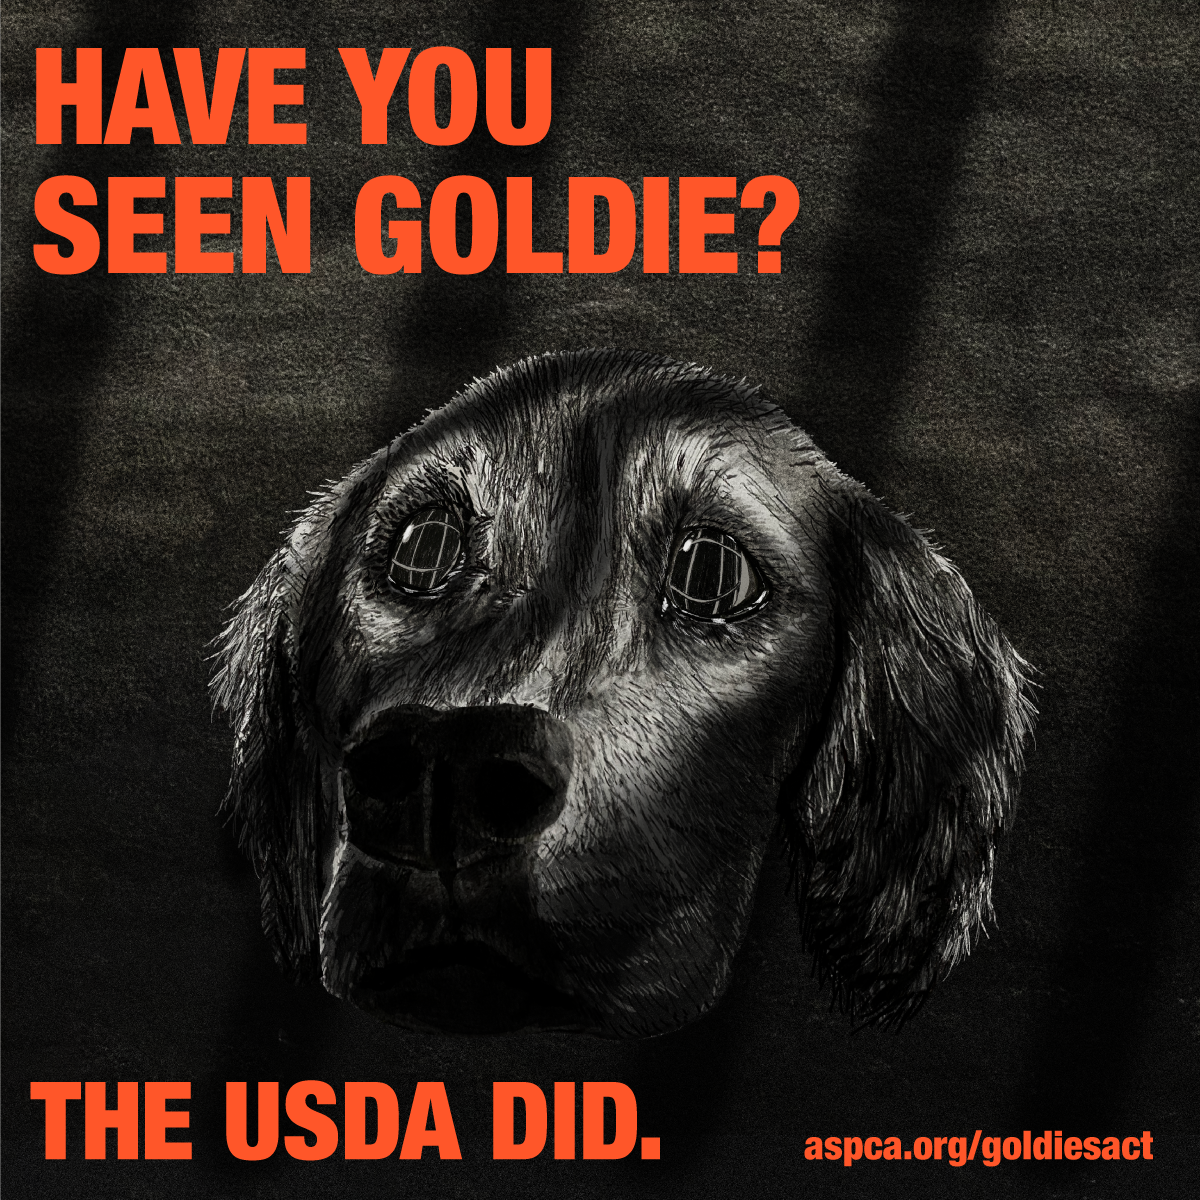 Goldie's Act Week of Action